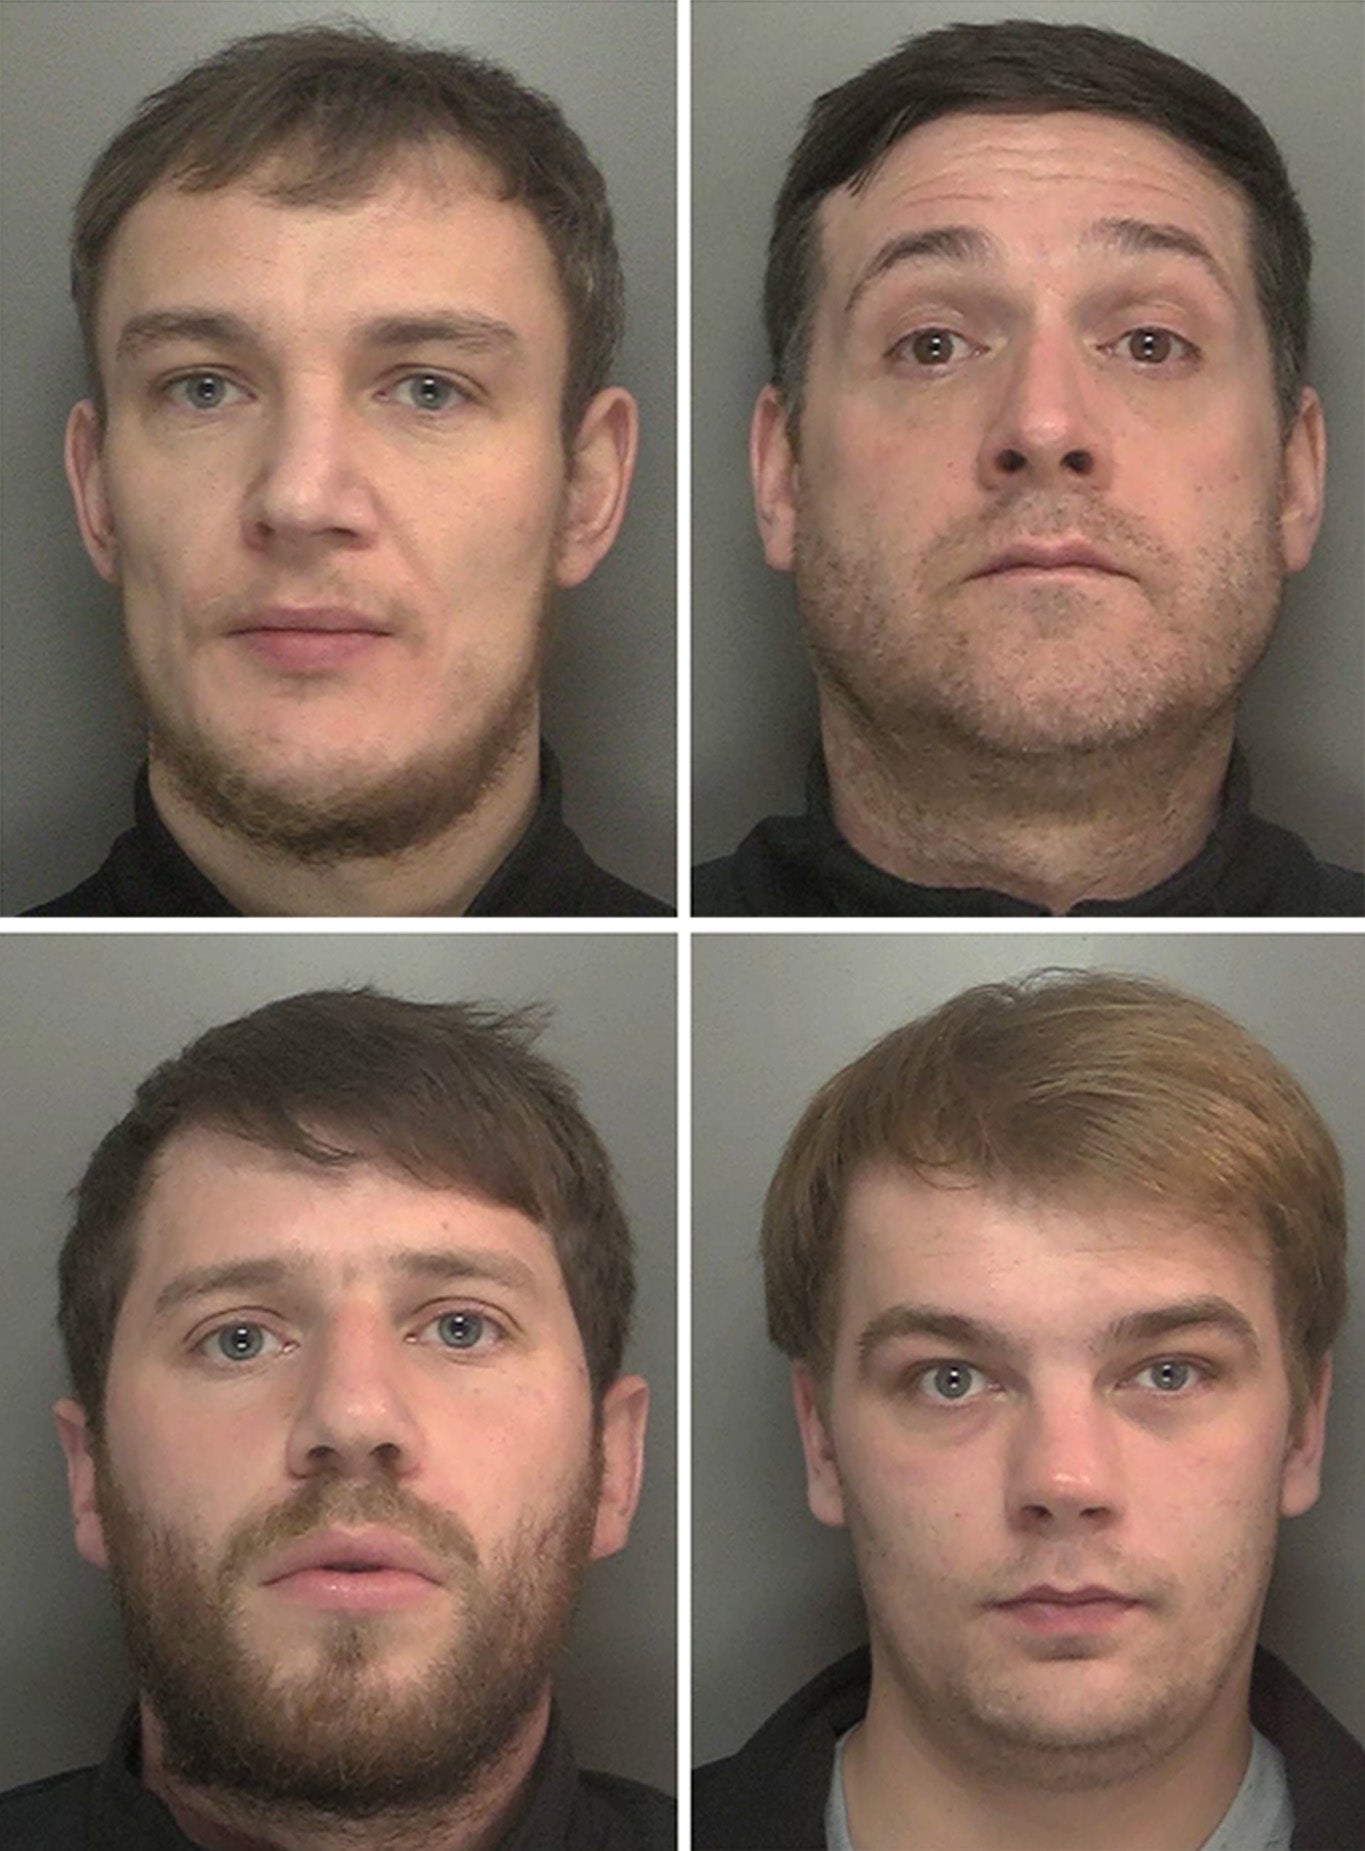 Clockwise from top left: Joseph Peers, James Witham, Niall Barry and Sean Zeisz, who have been jailed for Ms Dale’s murder